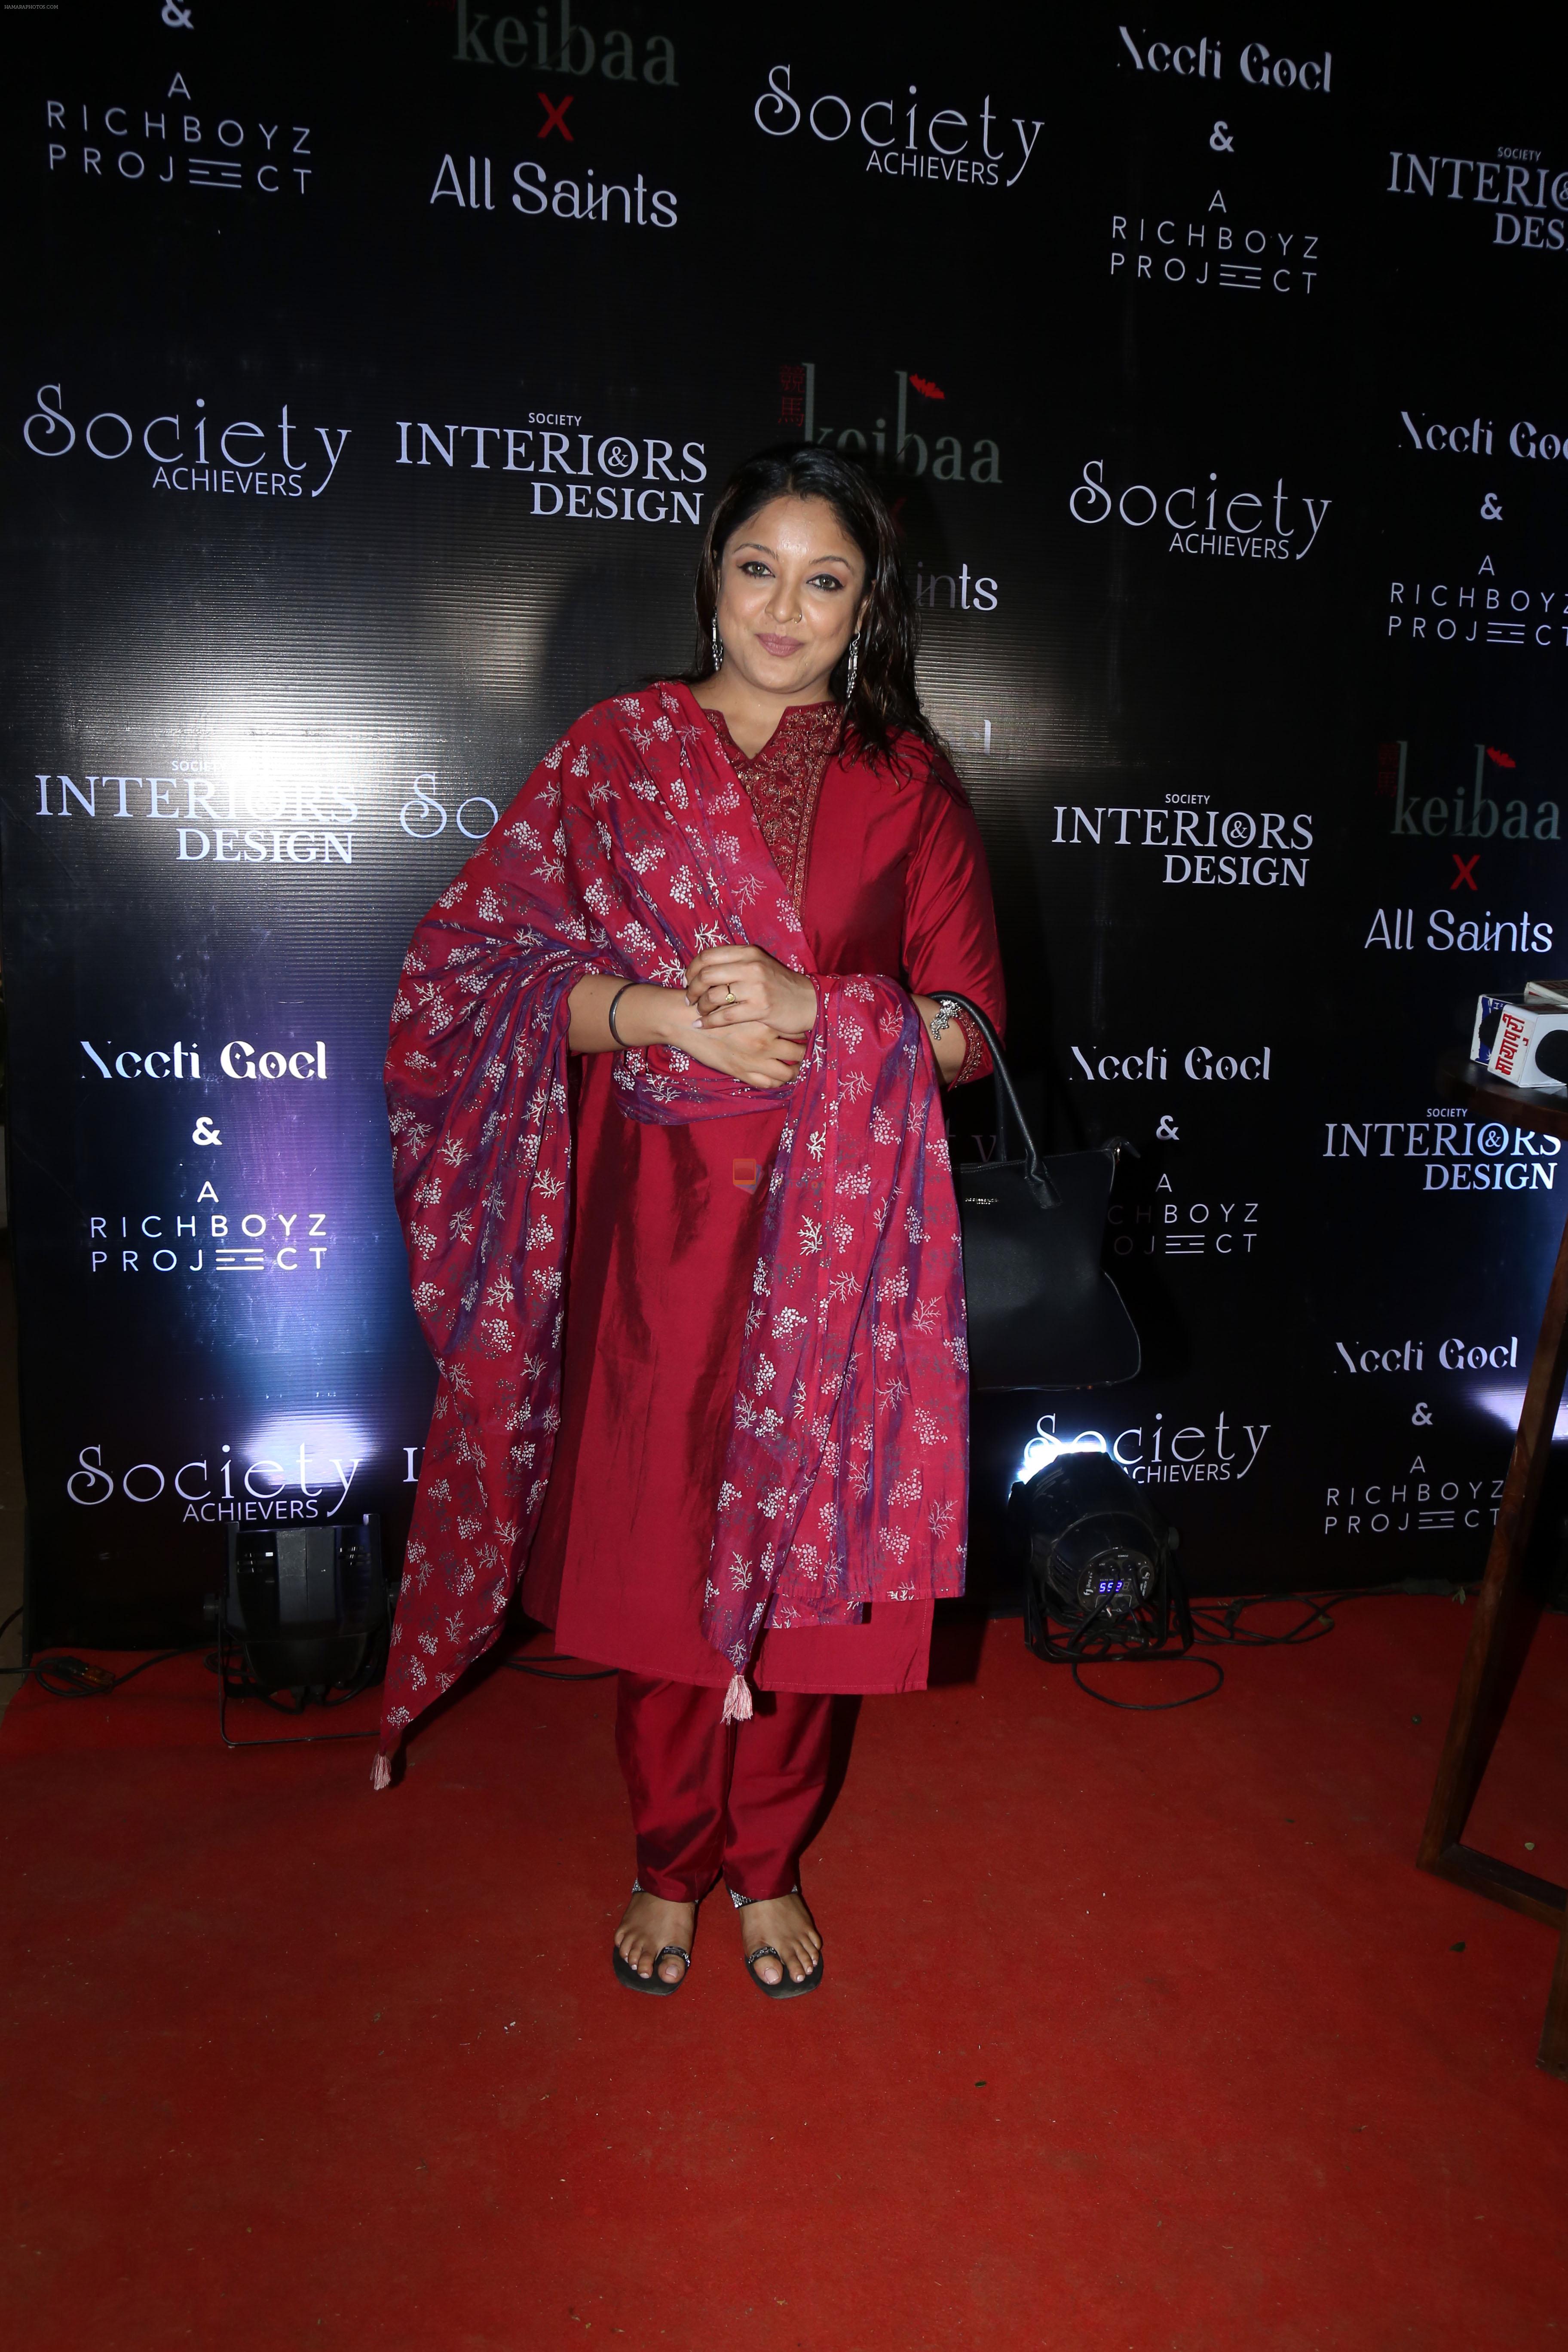 Tanushree Dutta at the ReOpening of Keibaa X All Saints and Celebration of Society Achievers and Society Interiors and Design Magazine